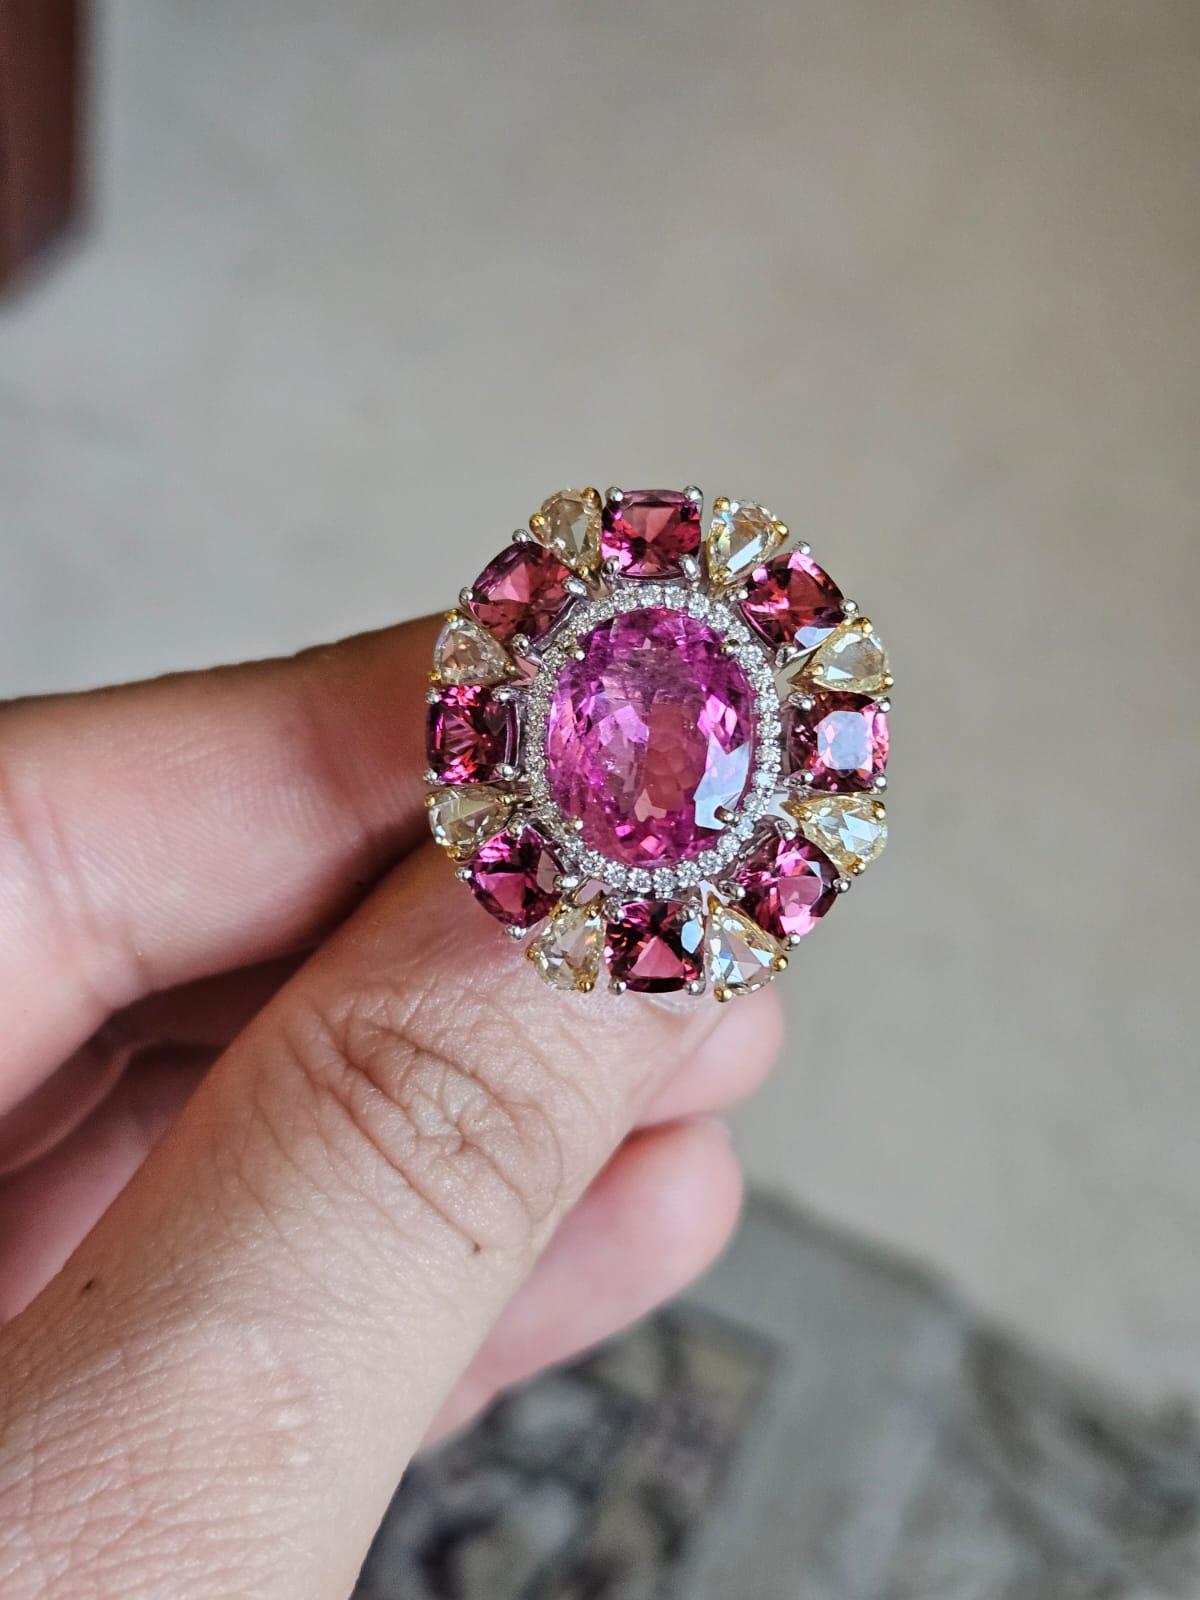 A very beautiful & gorgeous, Art Deco style, Rubellite Cocktail Ring set in 18K Rose Gold & Diamonds. The weight of the centre, oval shaped Rubellite is 5.89 carats. Other Rubellite weight is 4.39 carats. The combined Diamonds weight is 2.08 carats.